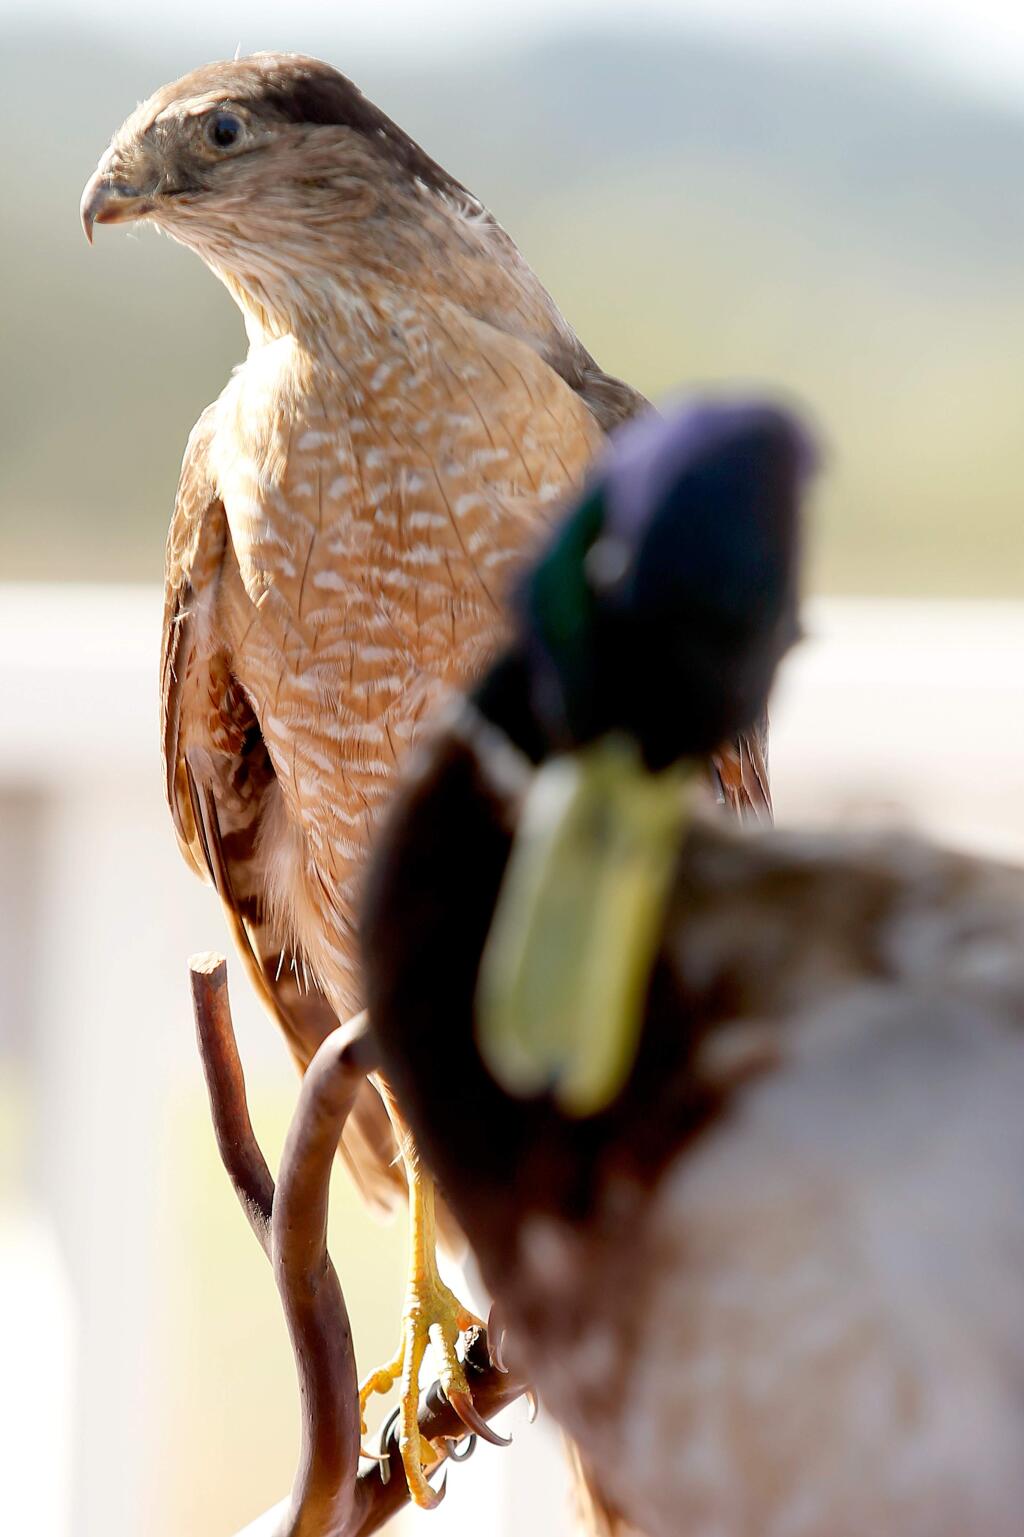 Taxidermies of a sharp-shinned hawk, left, and a mallard are displayed for guests with other examples of wildlife seen at the Laguna de Santa Rosa during the Wings, Wine and Wetlands fundraiser for the Laguna de Santa Rosa Foundation in Santa Rosa, California, on Sunday, September 24, 2017. (Alvin Jornada / The Press Democrat)